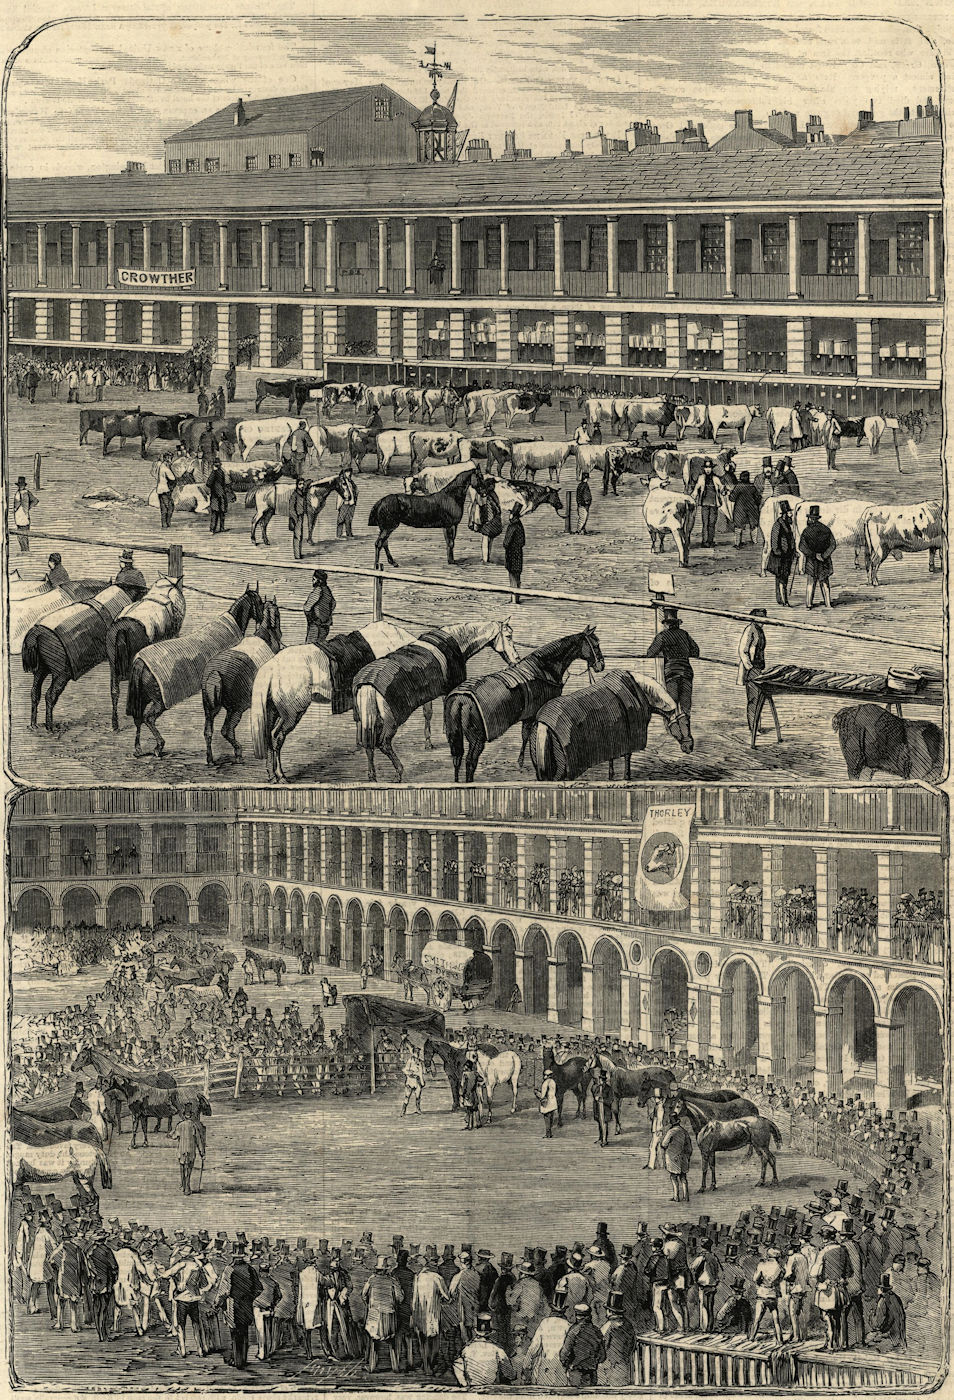 Associate Product Cattle show at Halifax. Yorkshire. Cows 1859 antique ILN full page print